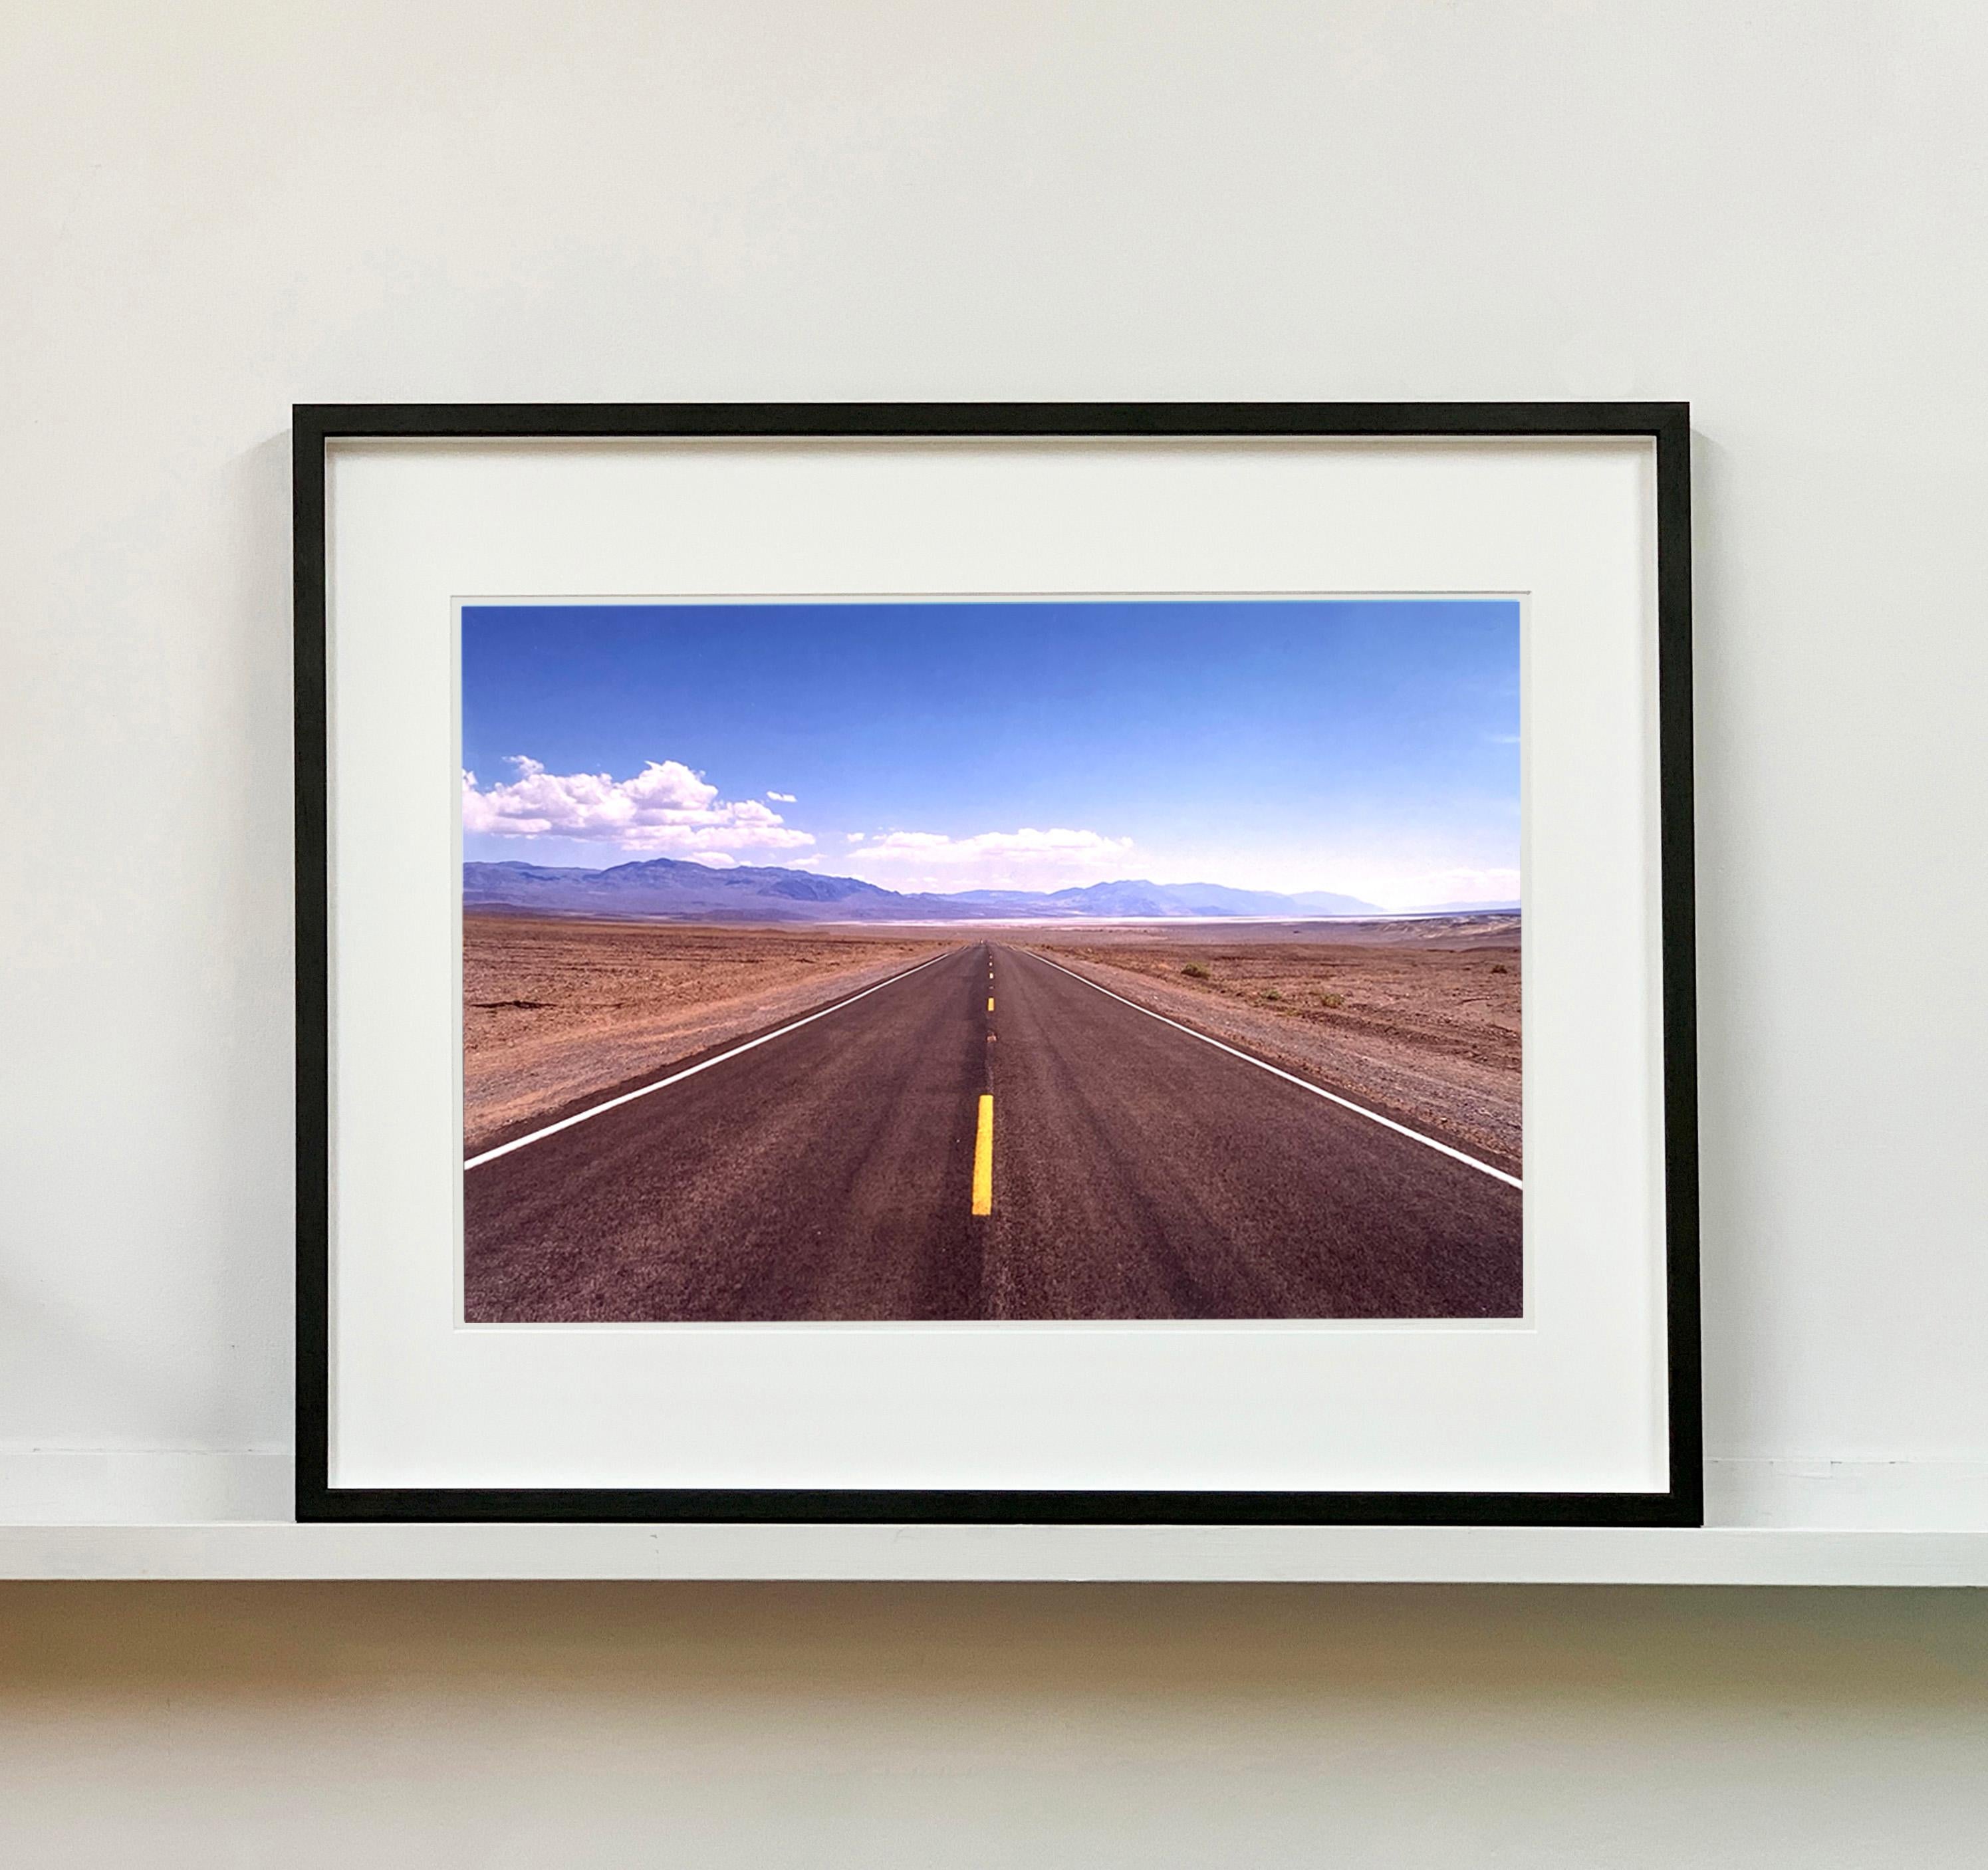 The Road to Death Valley, Mojave Desert, California - Landscape Color Photo - Pop Art Photograph by Richard Heeps